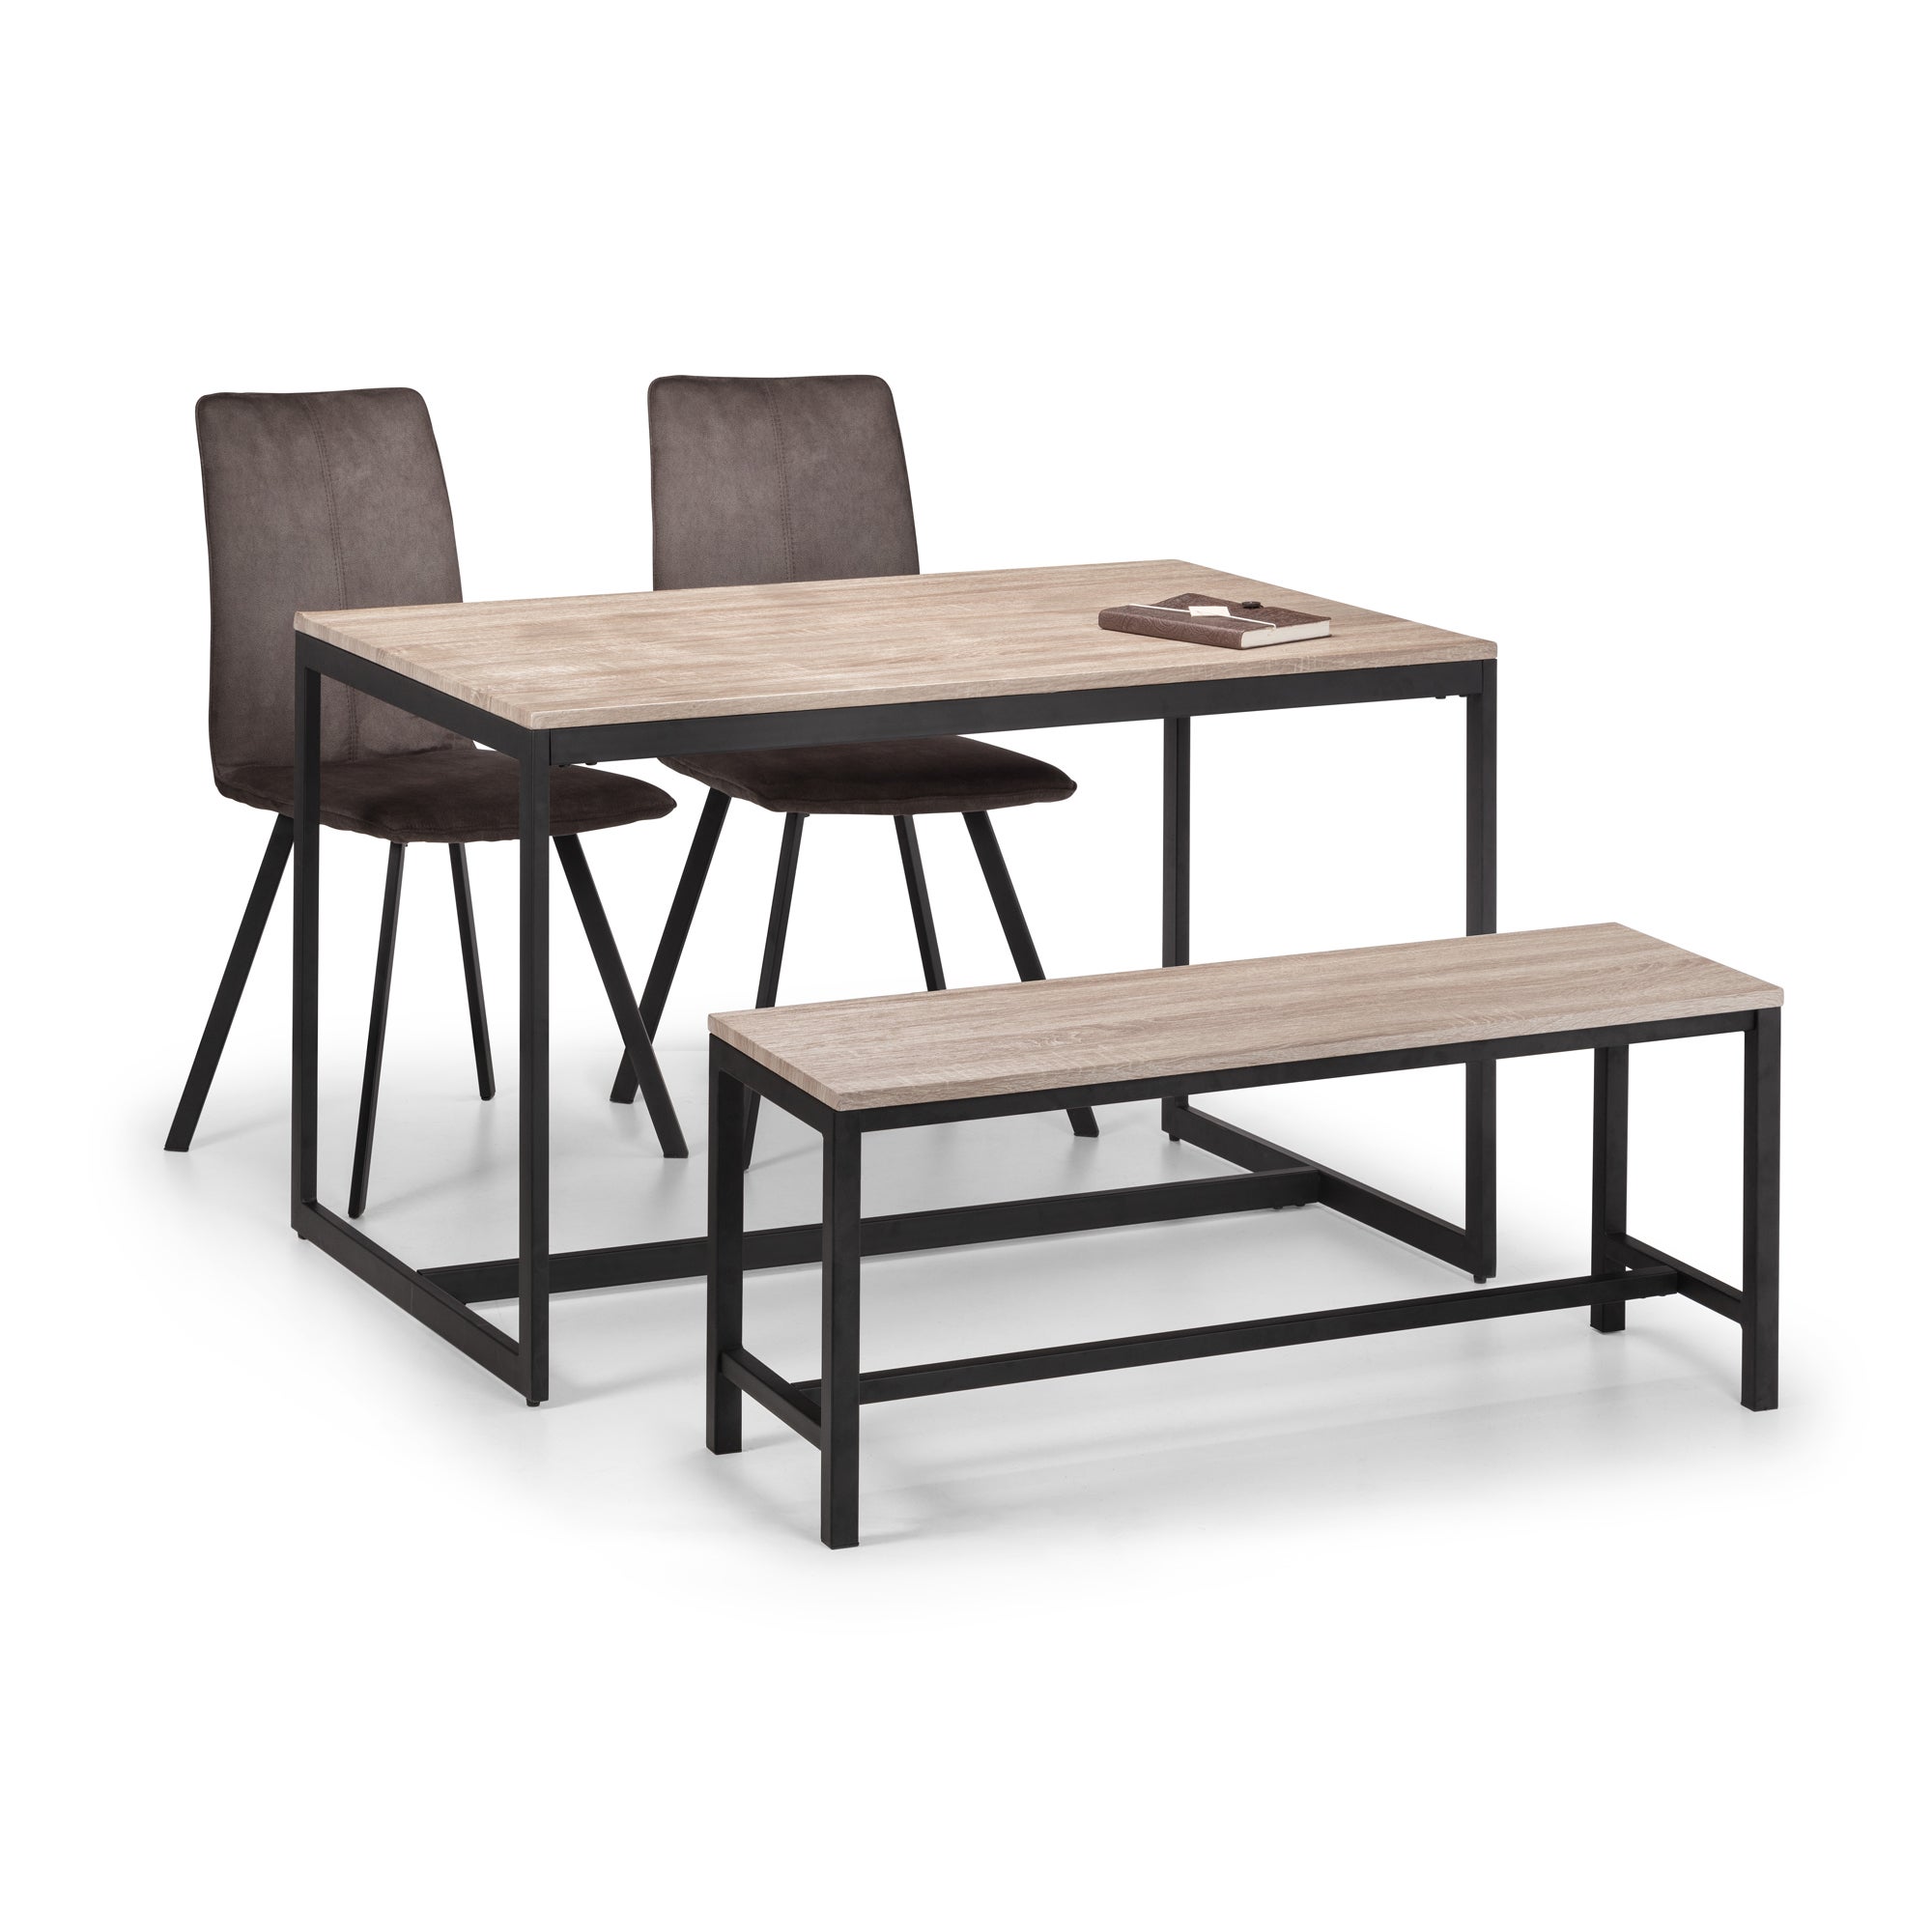 Tribeca Rectangular Dining Table with 2 Chairs and Bench, Black